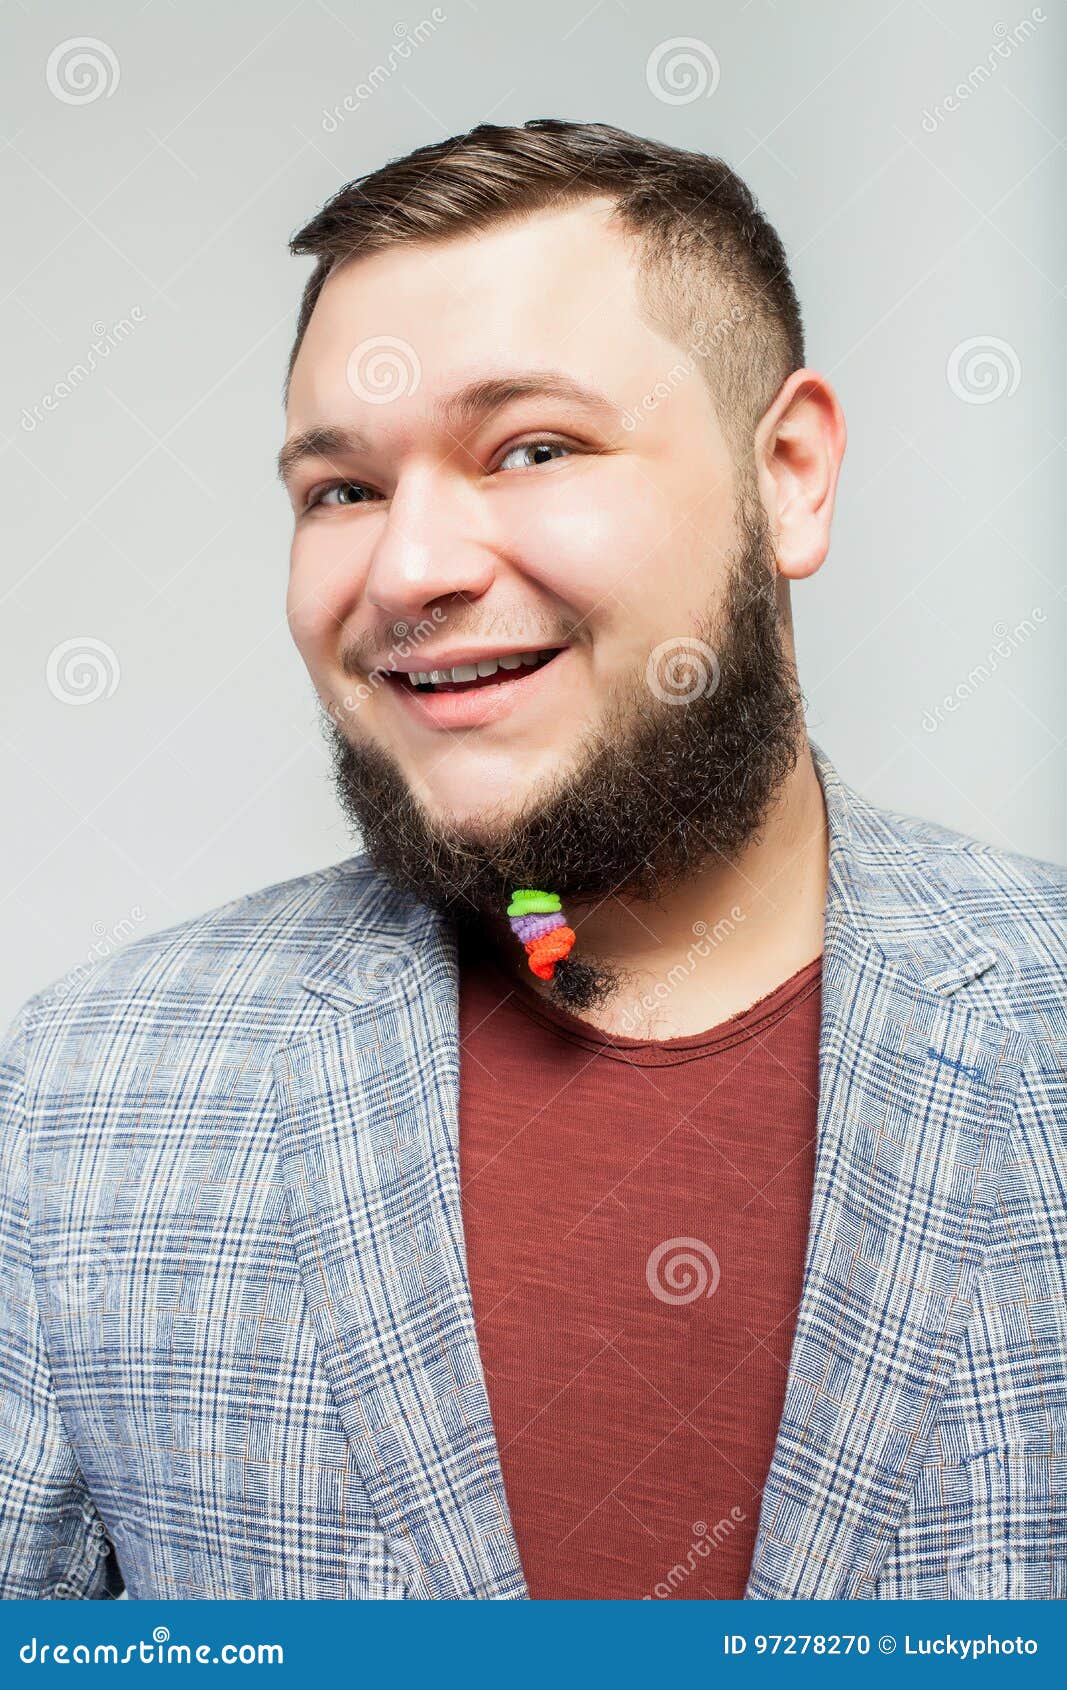 Young man with beard stock photo. Image of barrette, hipster - 97278270